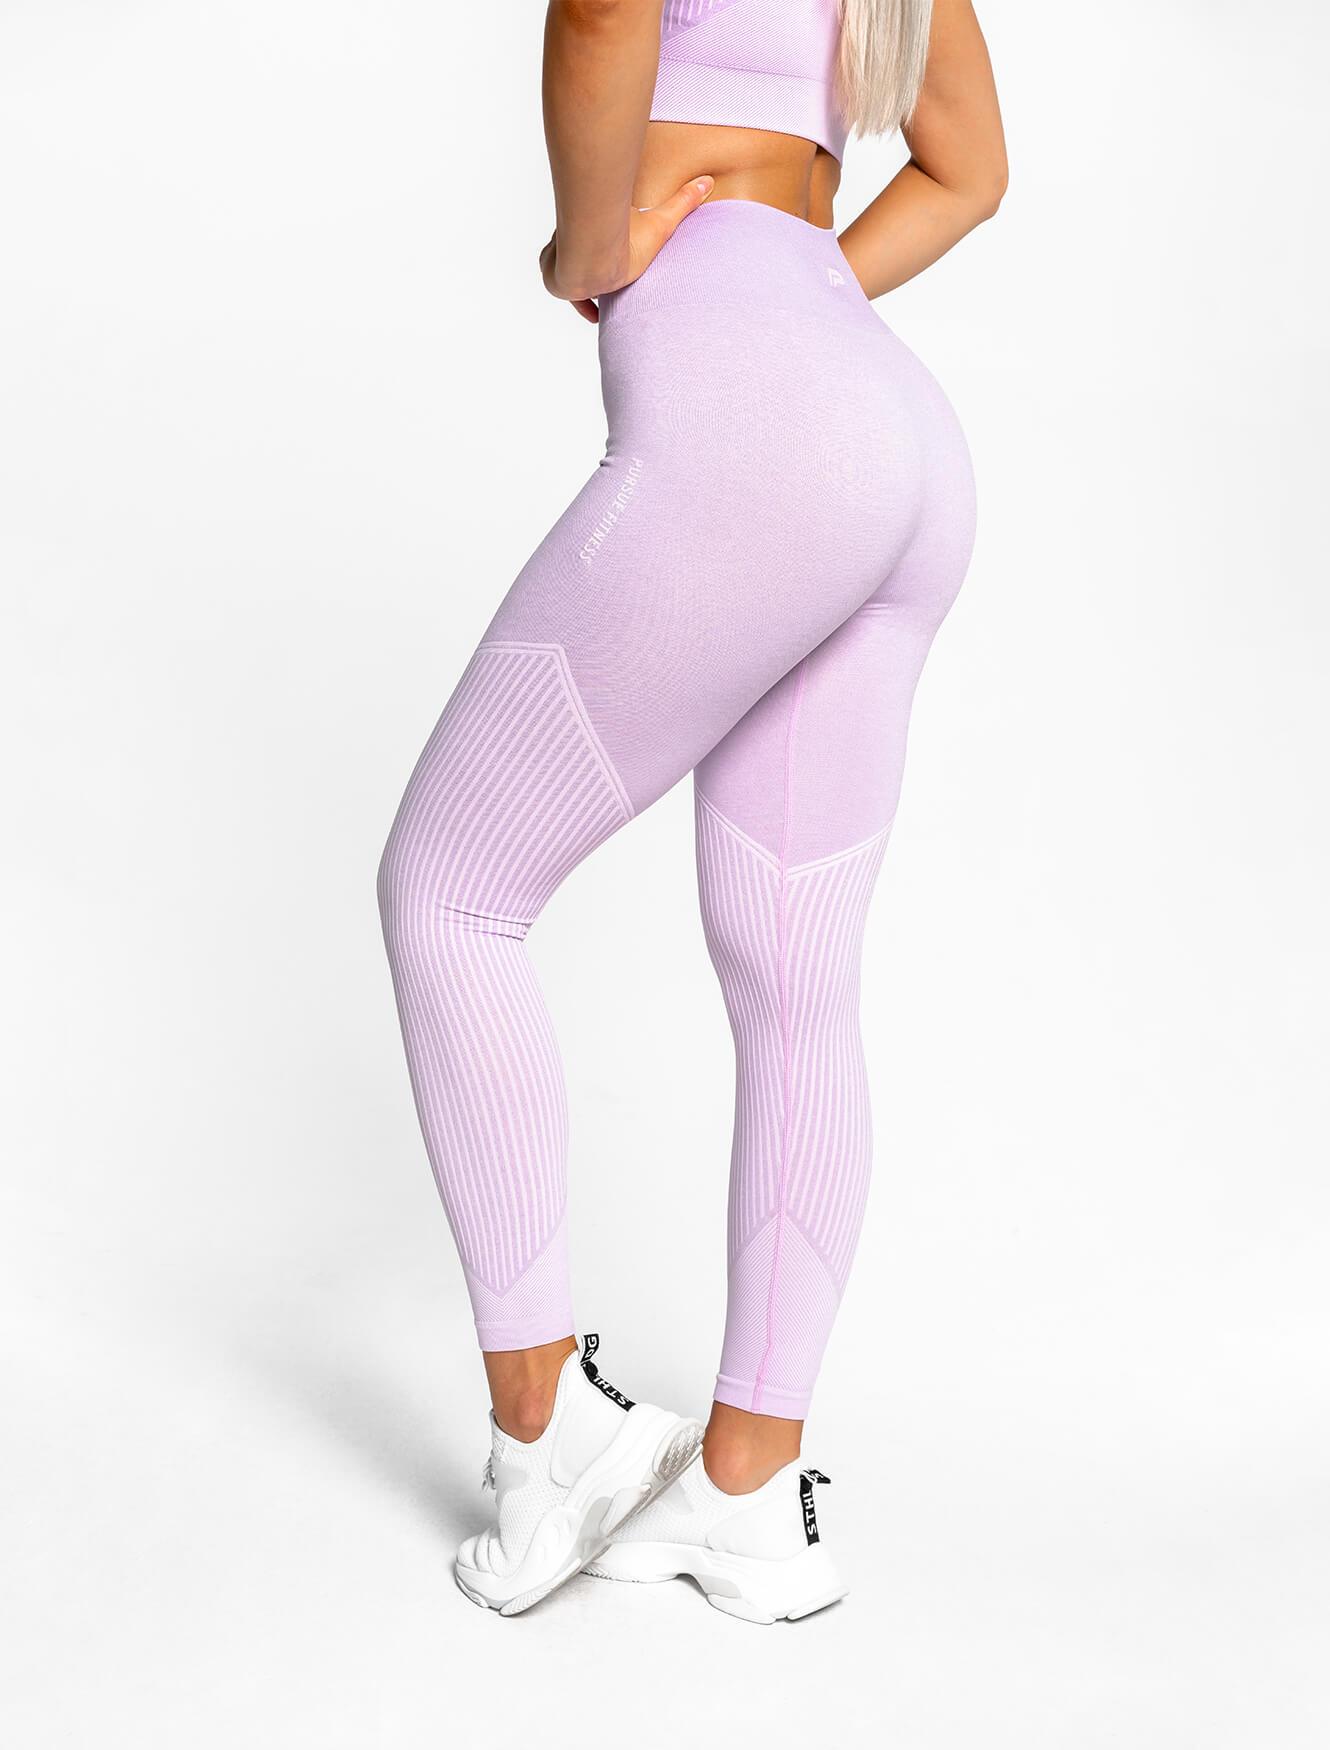 Women's Seamless High-Rise Leggings - All In Motion™ Lilac Purple XS